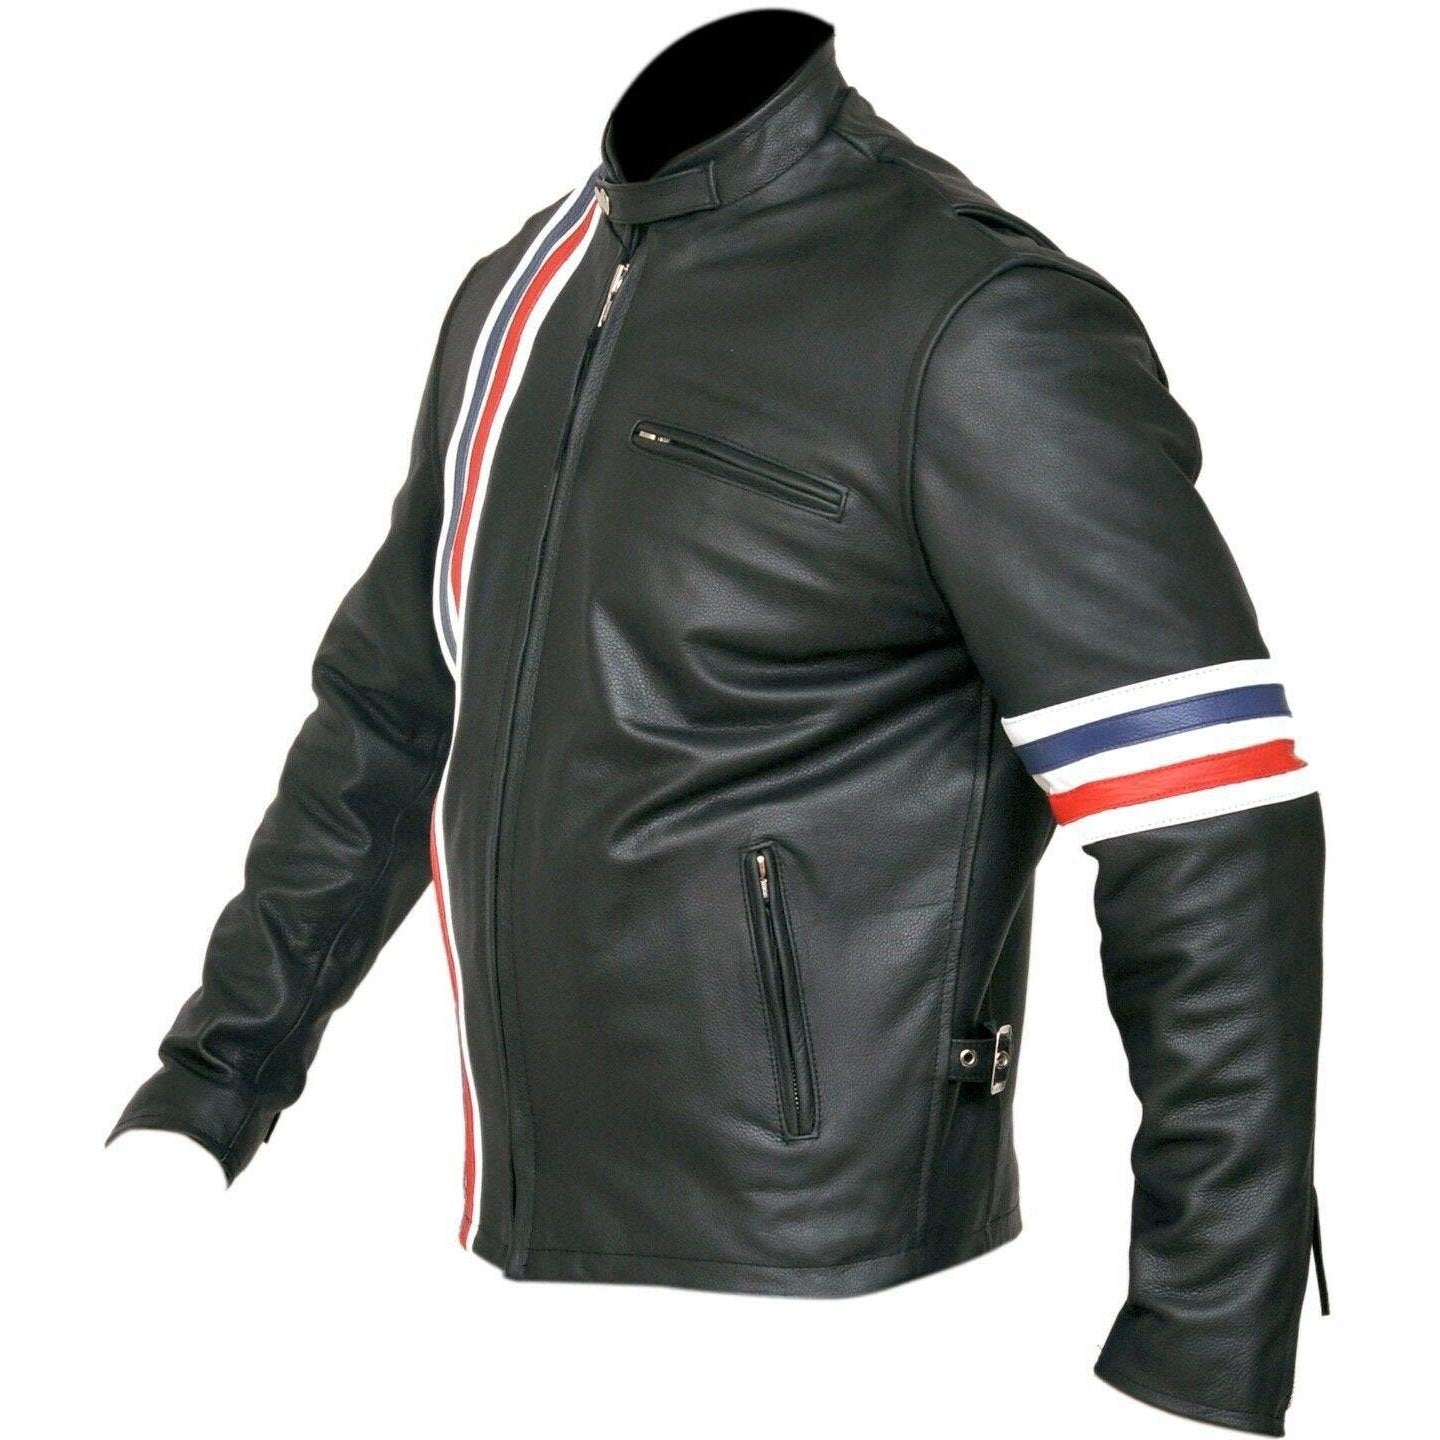 Peter fonda easy rider striped cowhide leather motorcycle jacket